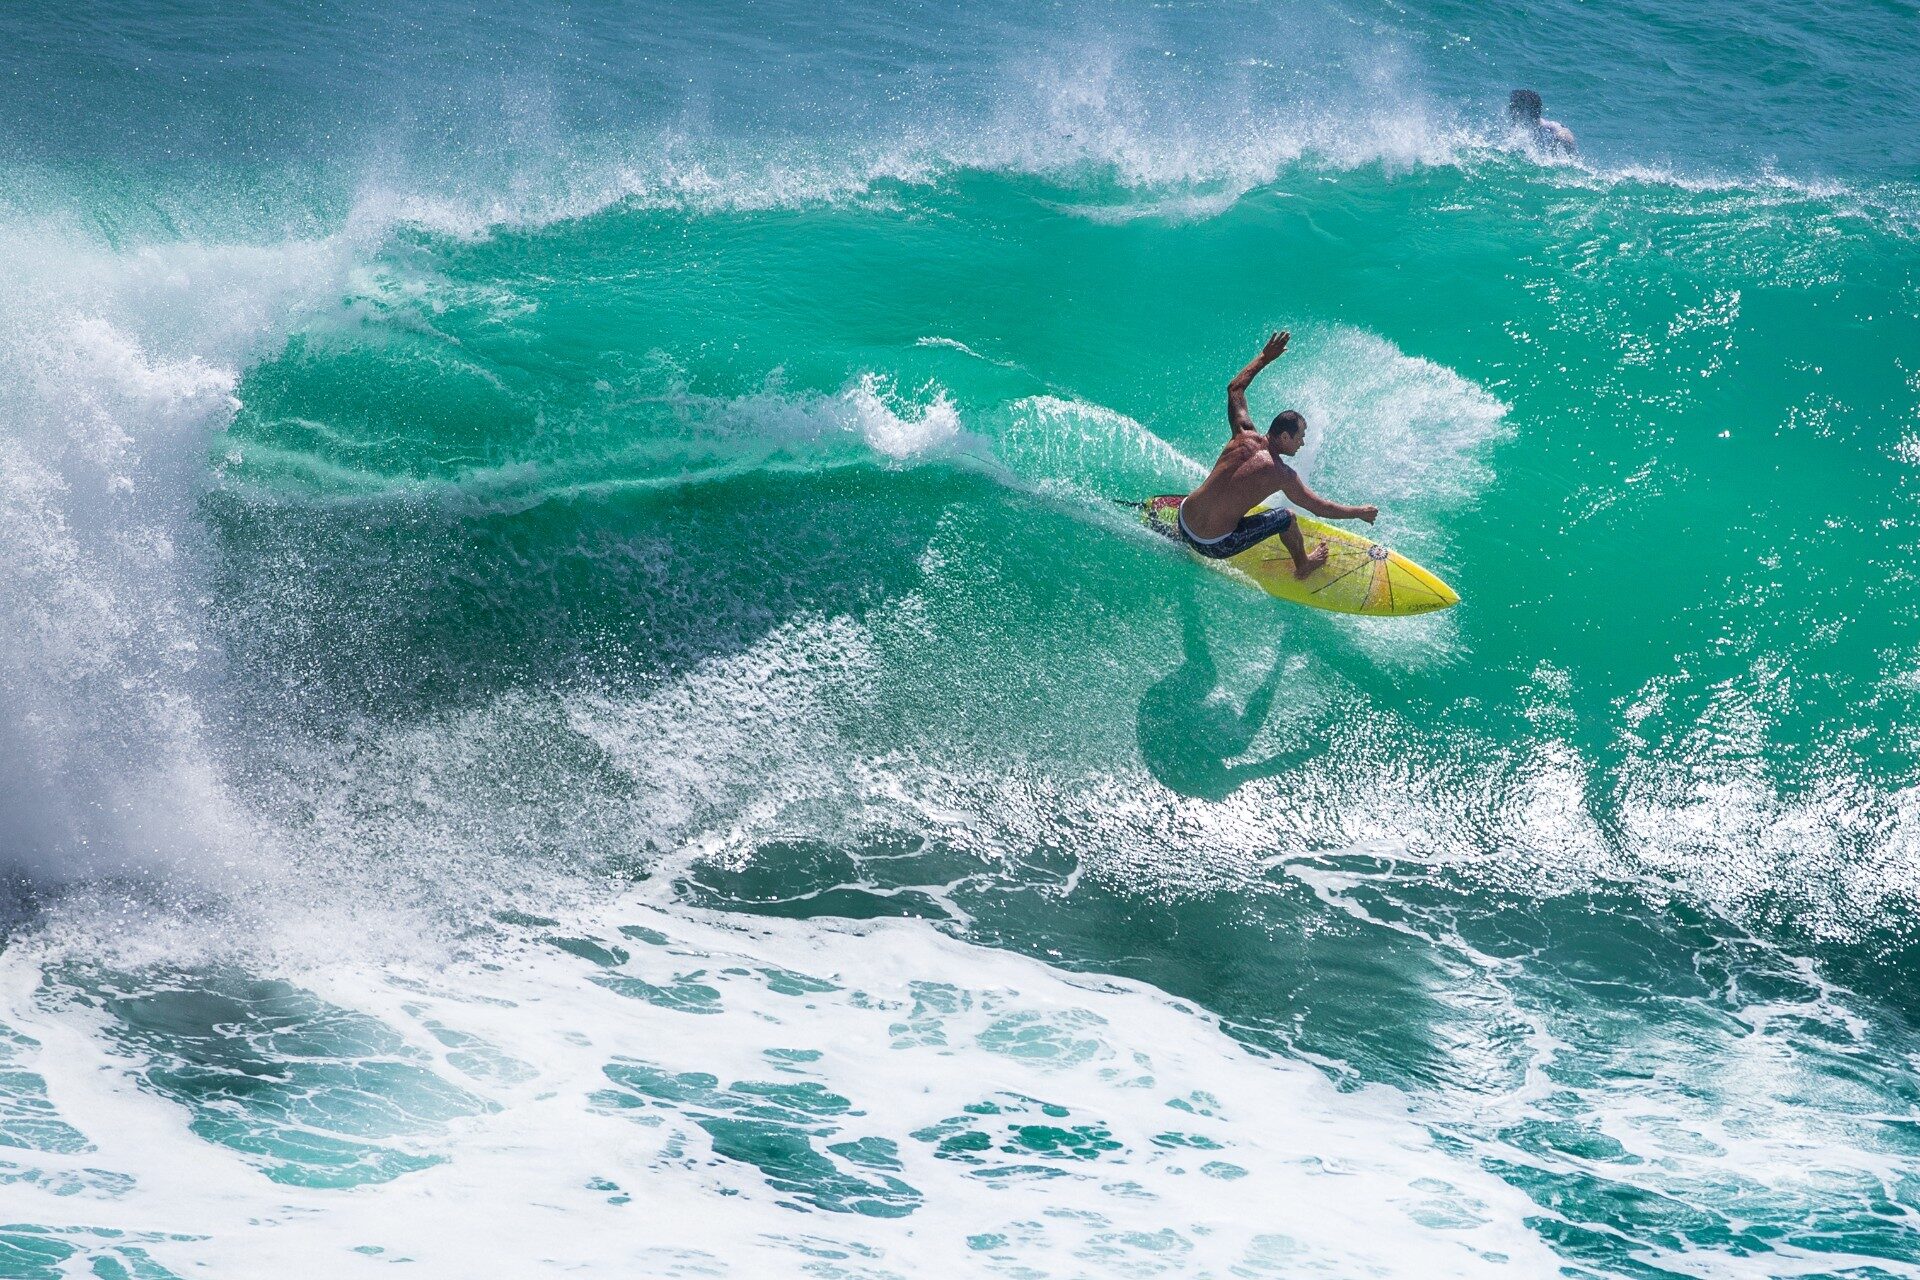 Planning a surfing trip? Find out when, where to catch the best waves